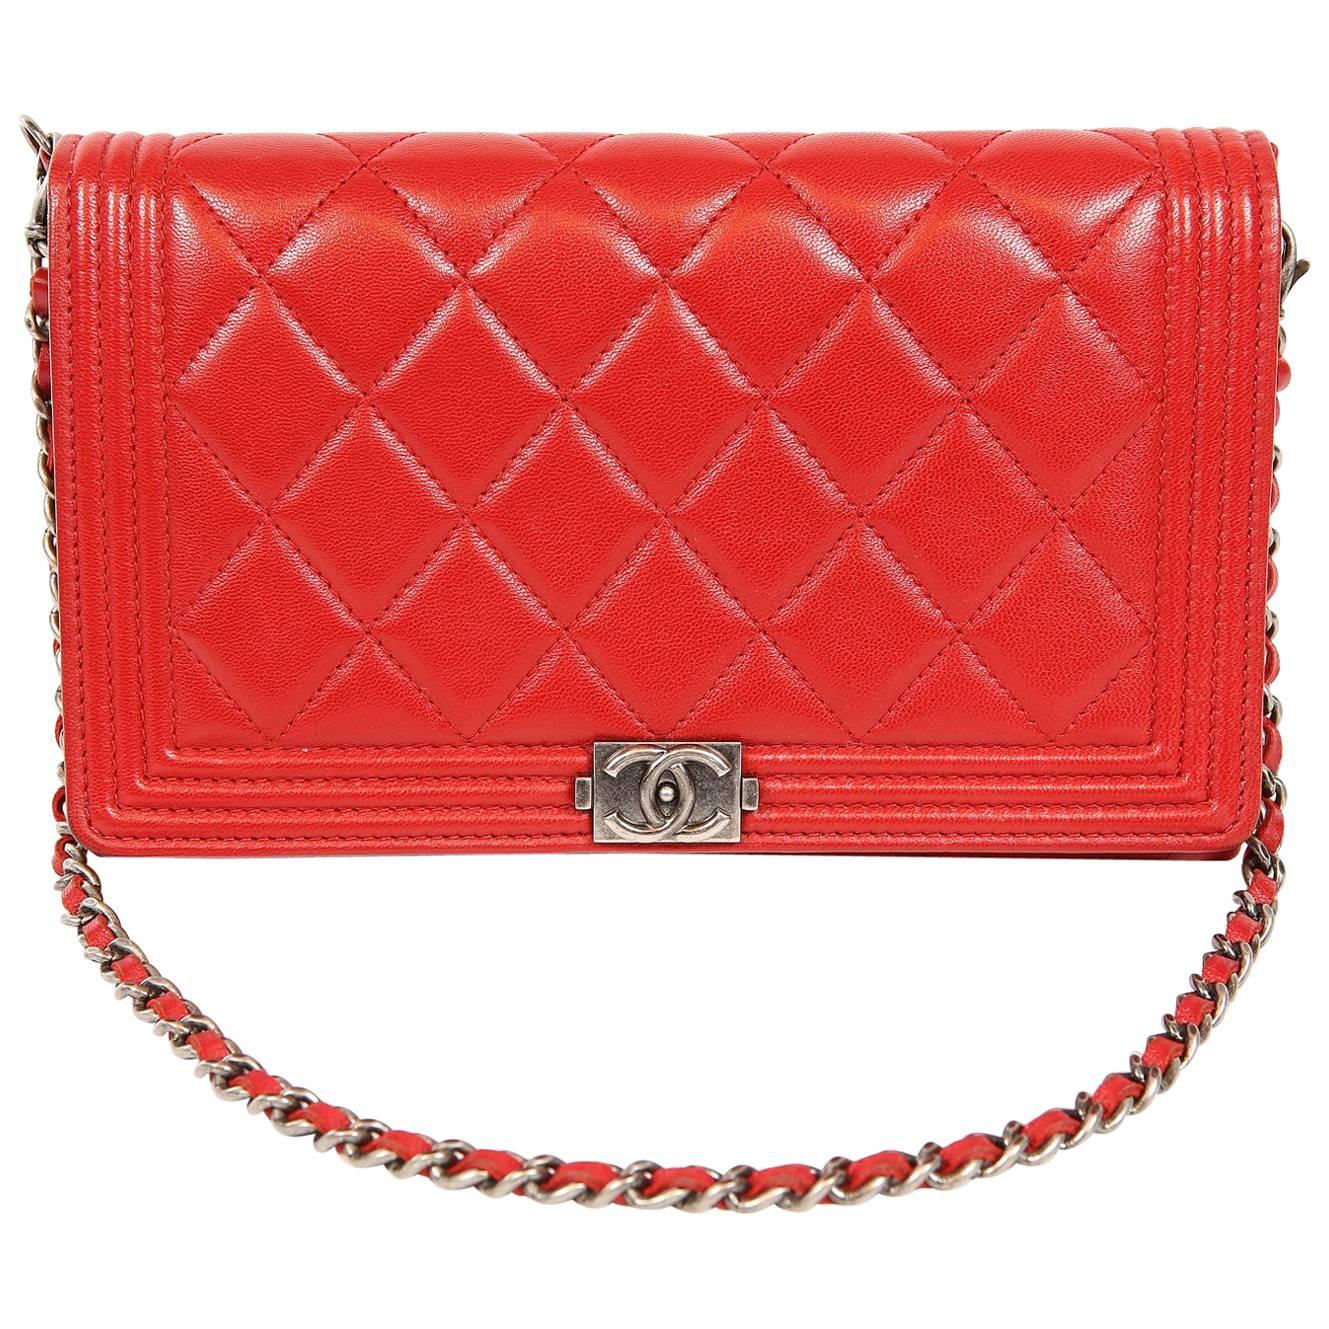 Chanel Red Leather Boy Bag Clutch with Chain